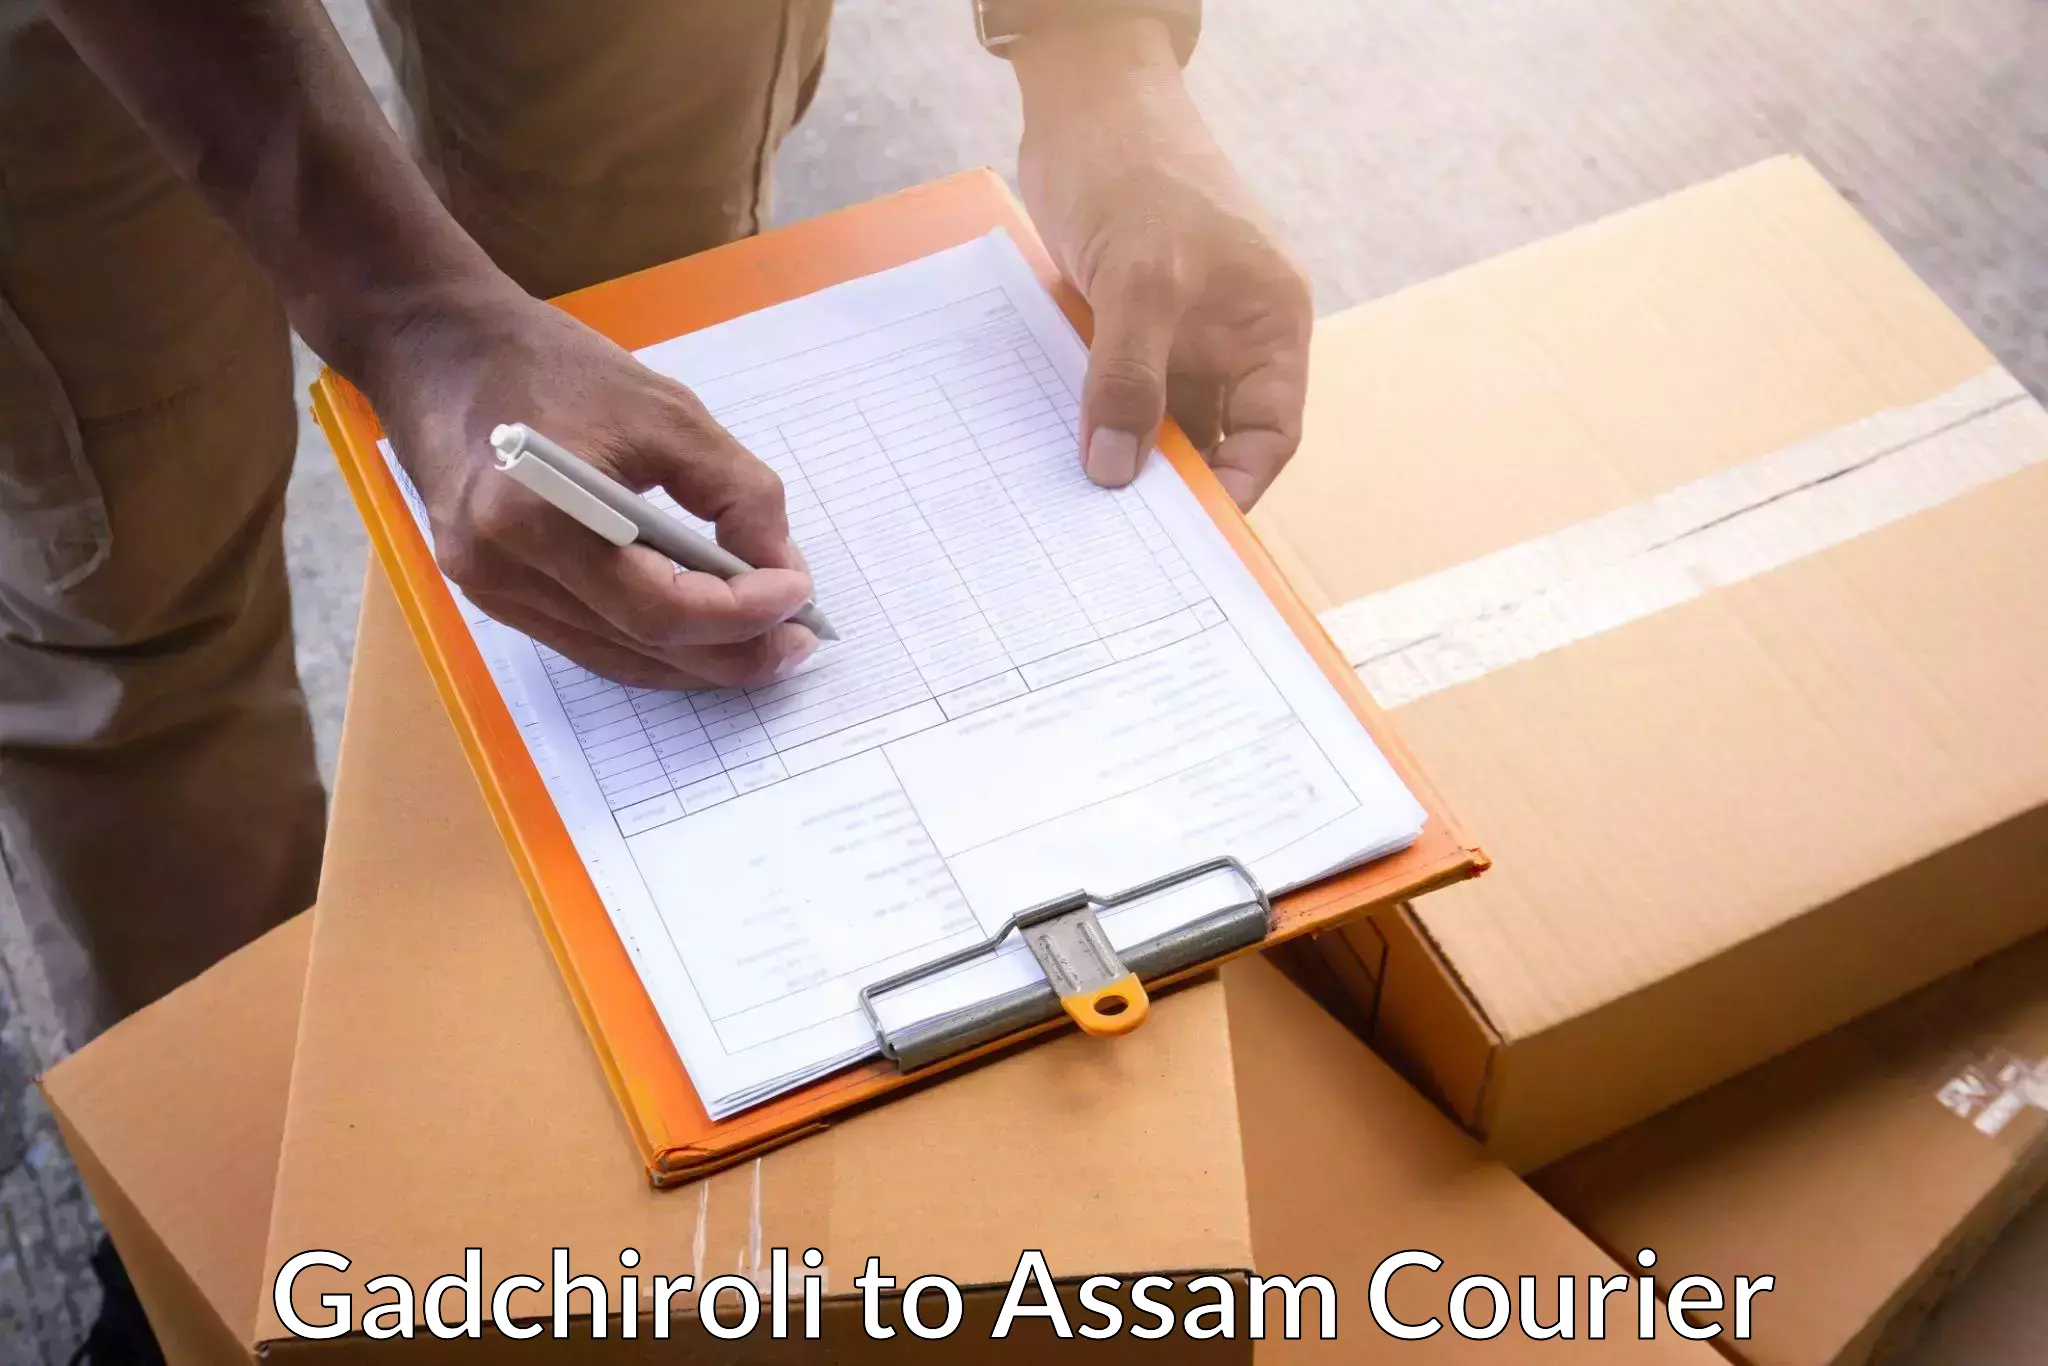 Efficient parcel tracking in Gadchiroli to Lala Assam